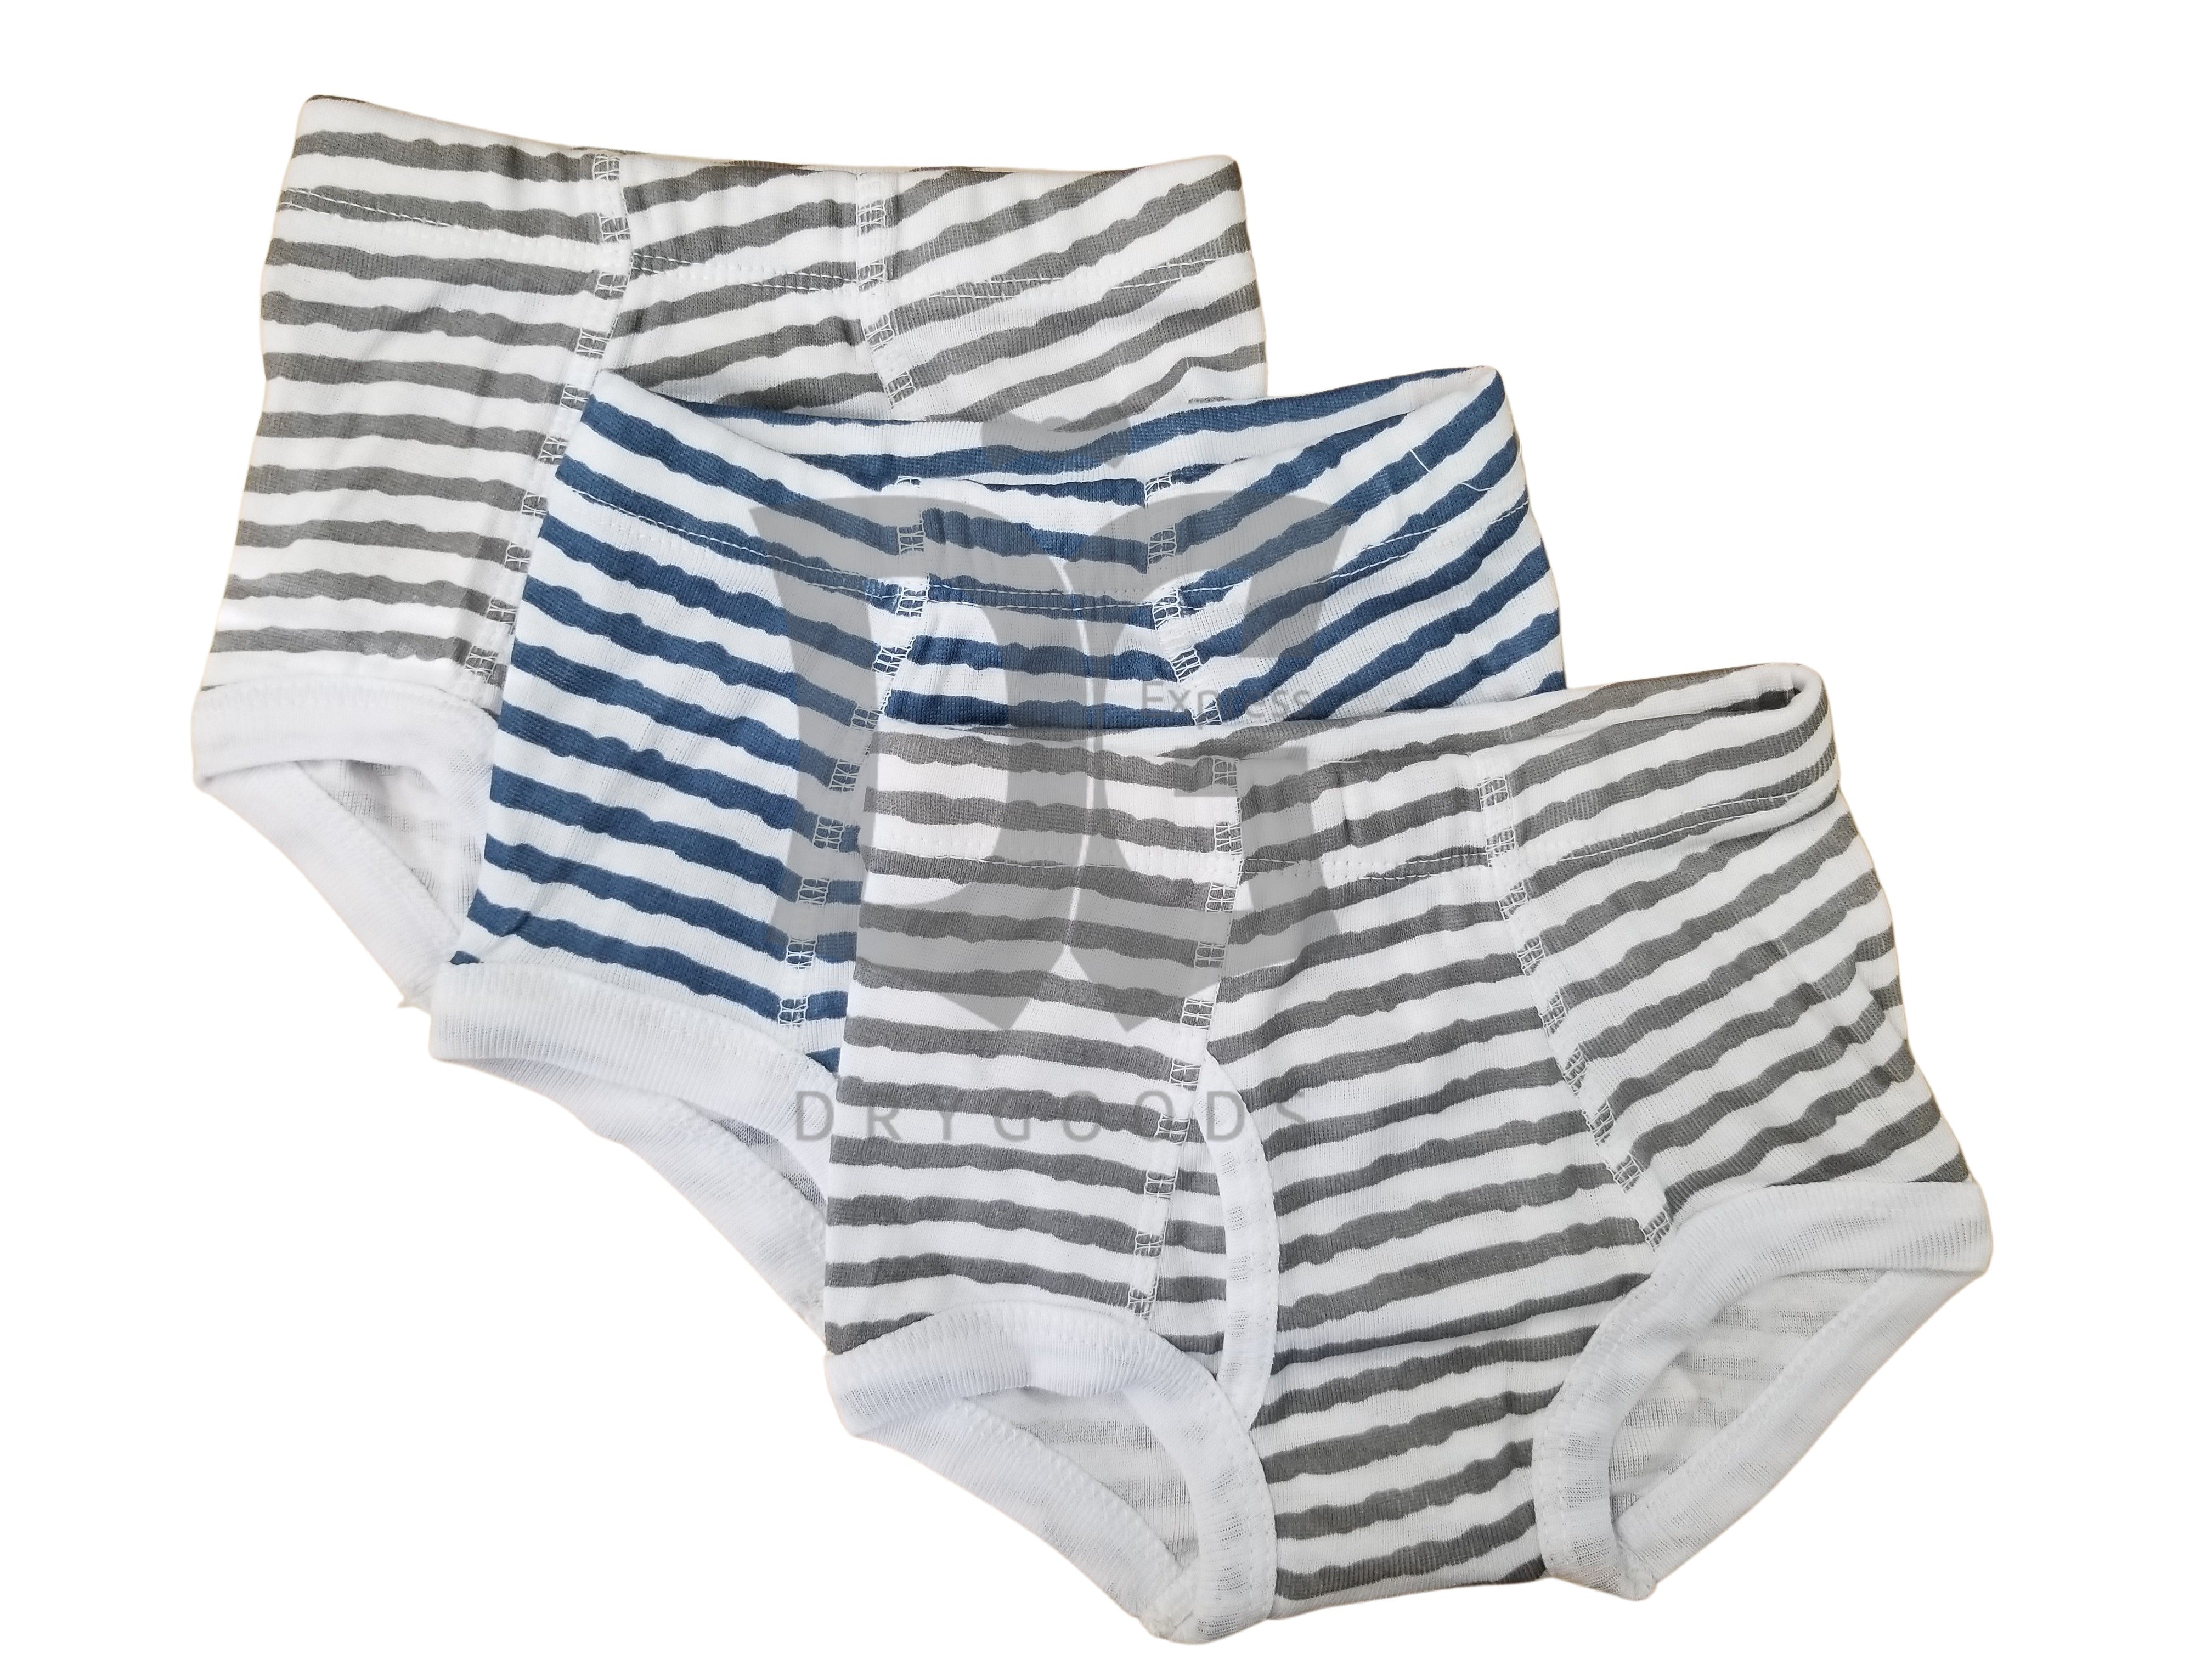  Jack & Jill Boys White Briefs 100% Cotton (Size 18): Clothing,  Shoes & Jewelry